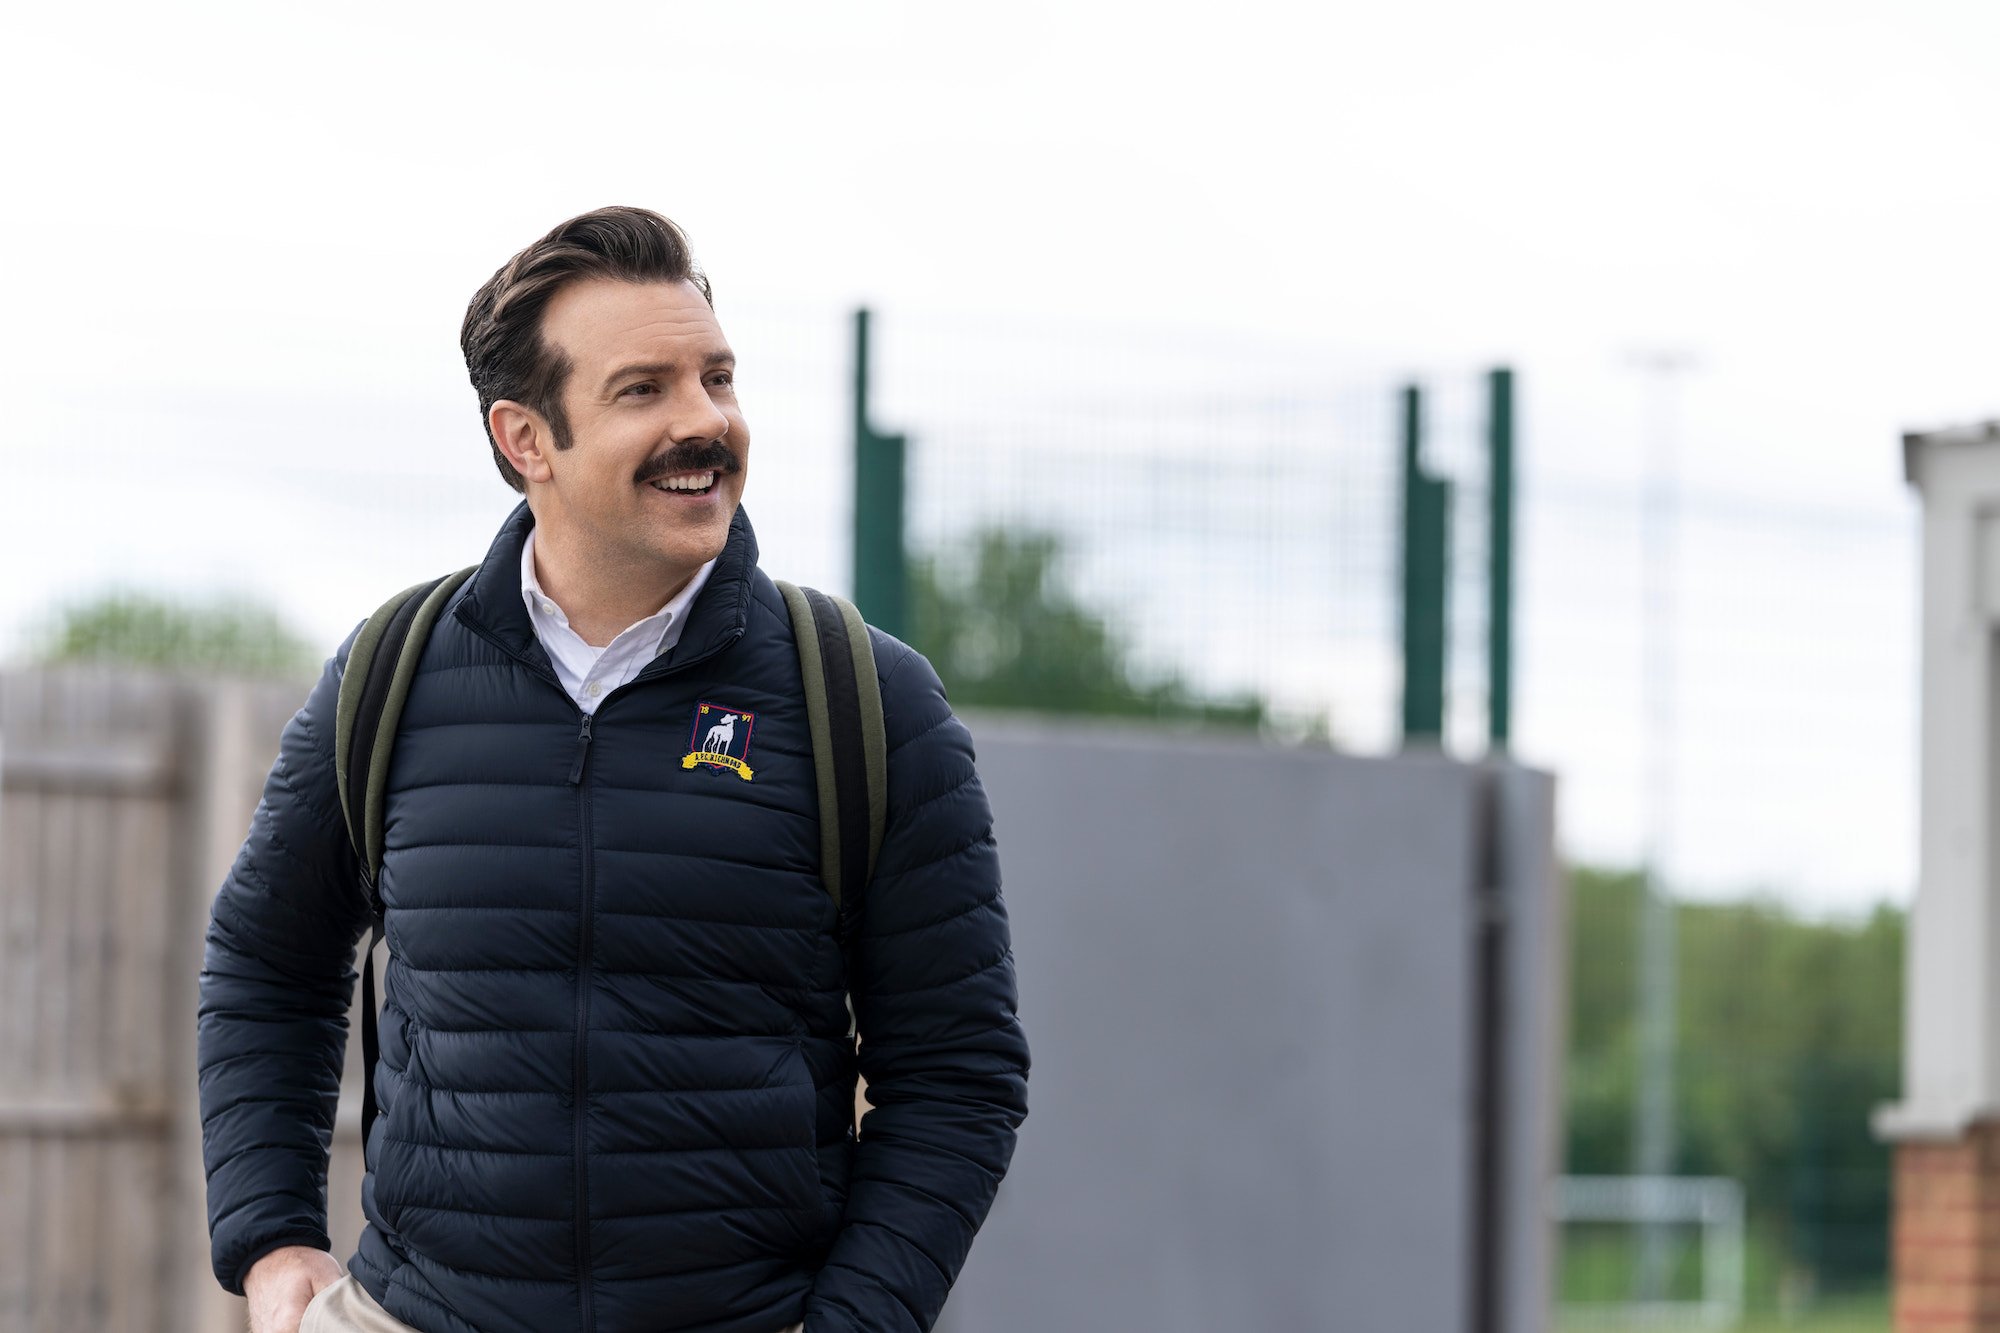 Ted Lasso (Jason Sudeikis) looks to his left and smiles